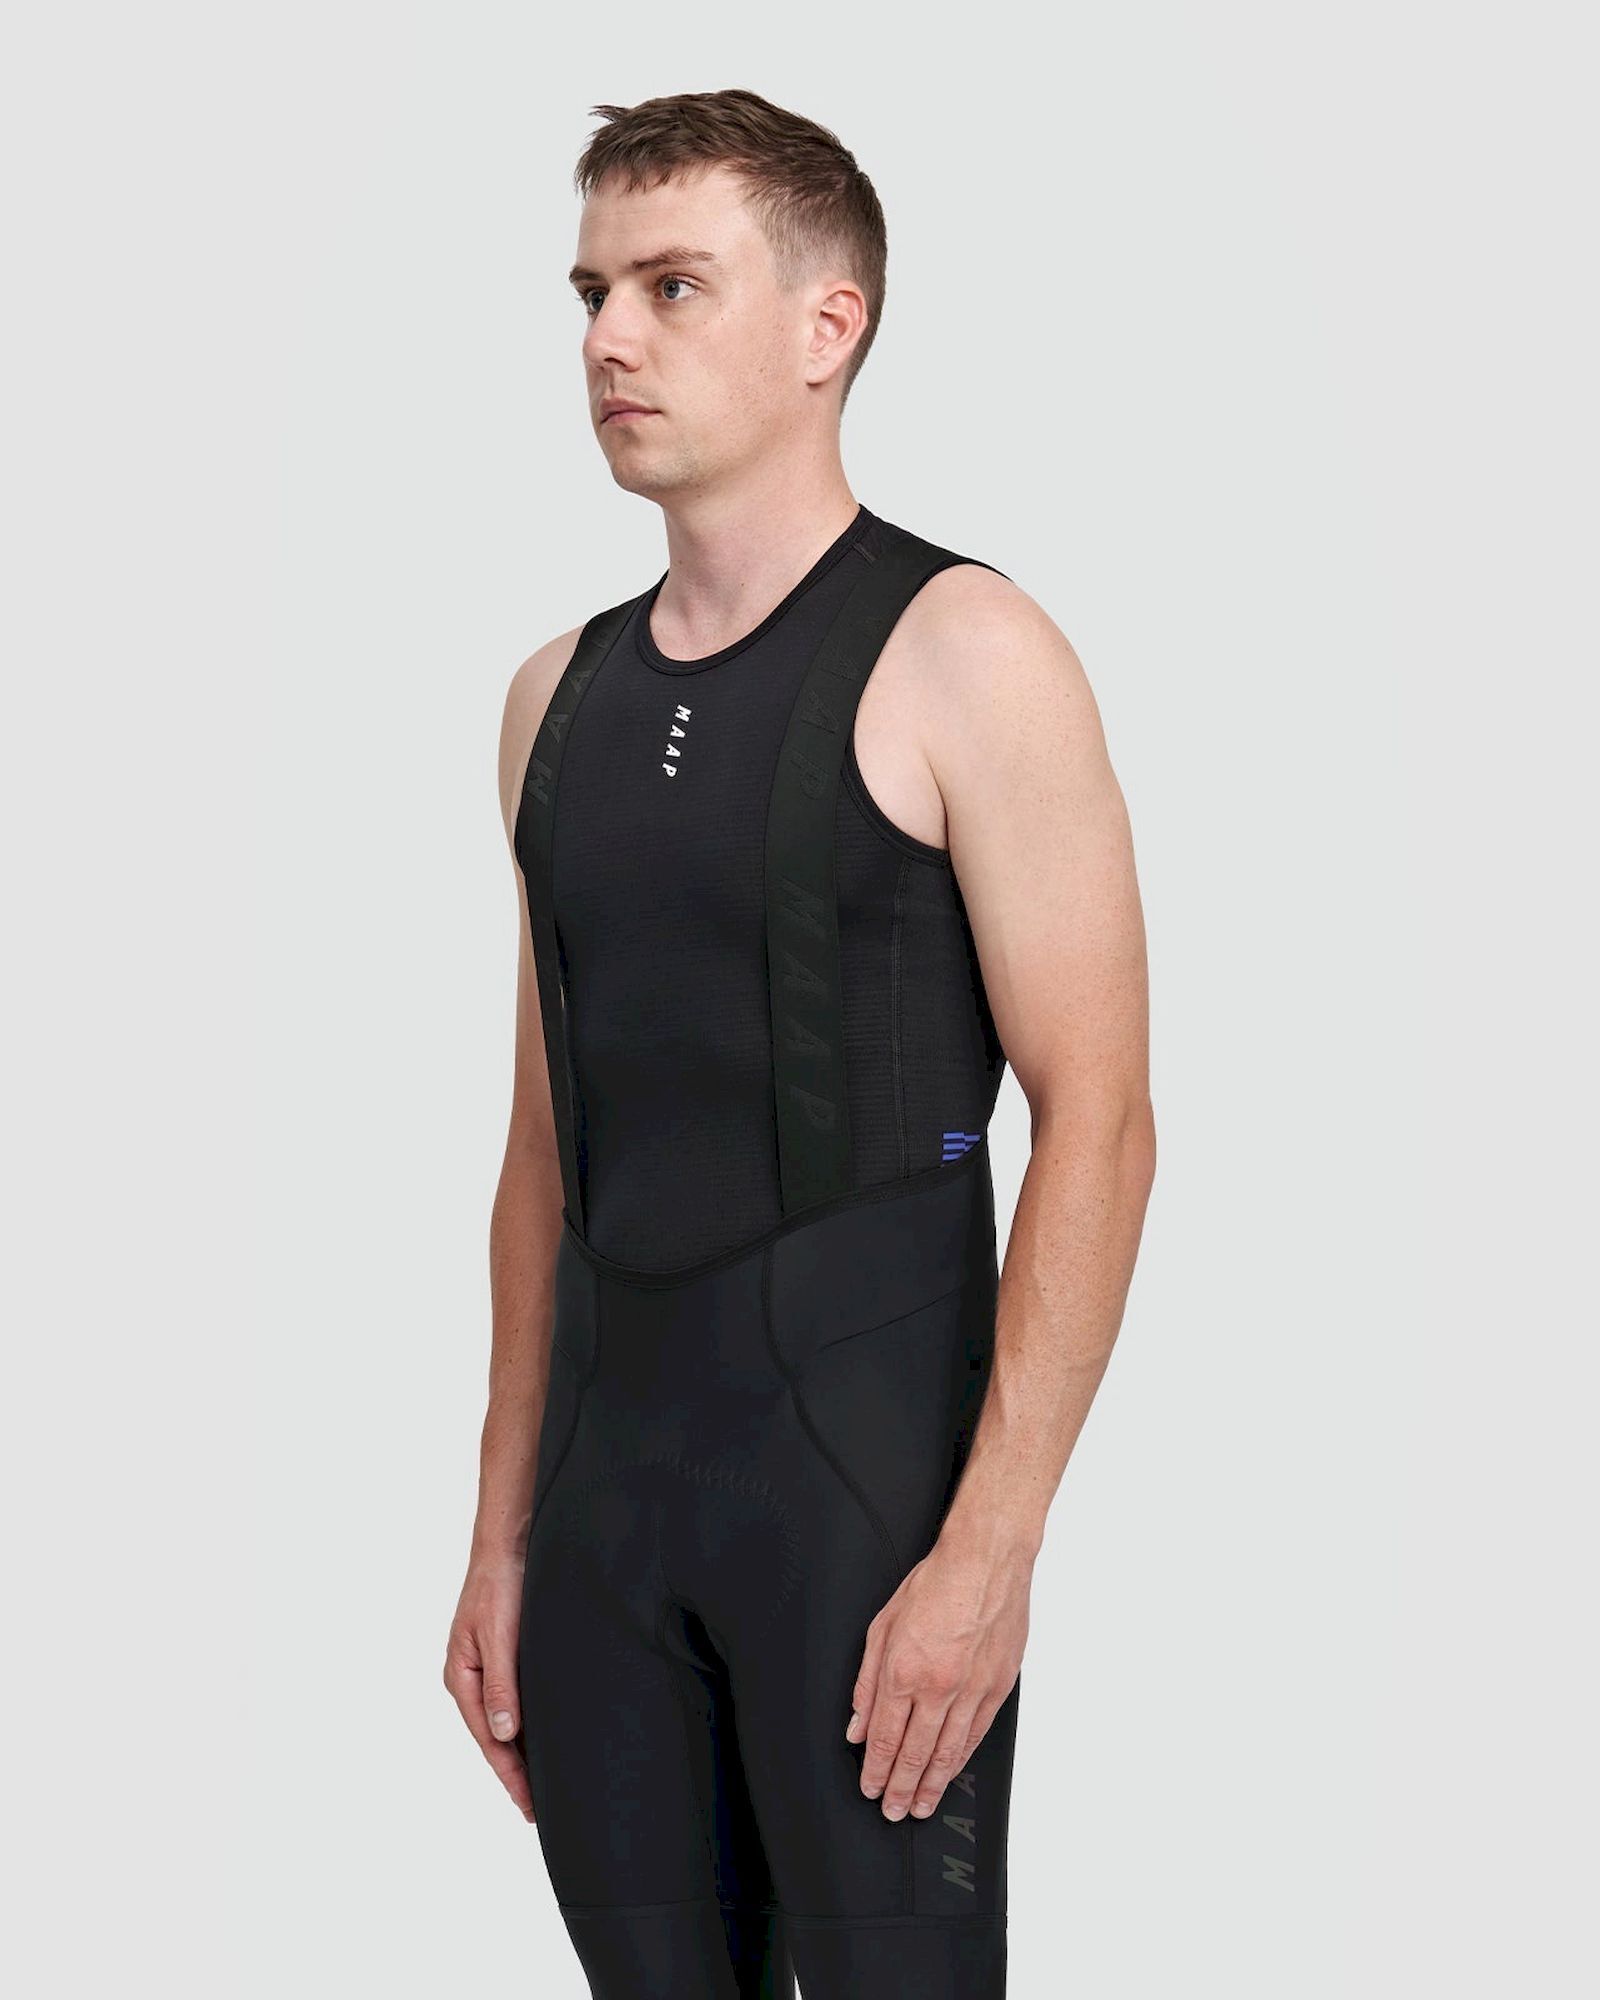 Maap Thermal Base Layer Vest - Ropa interior - Hombre | Hardloop